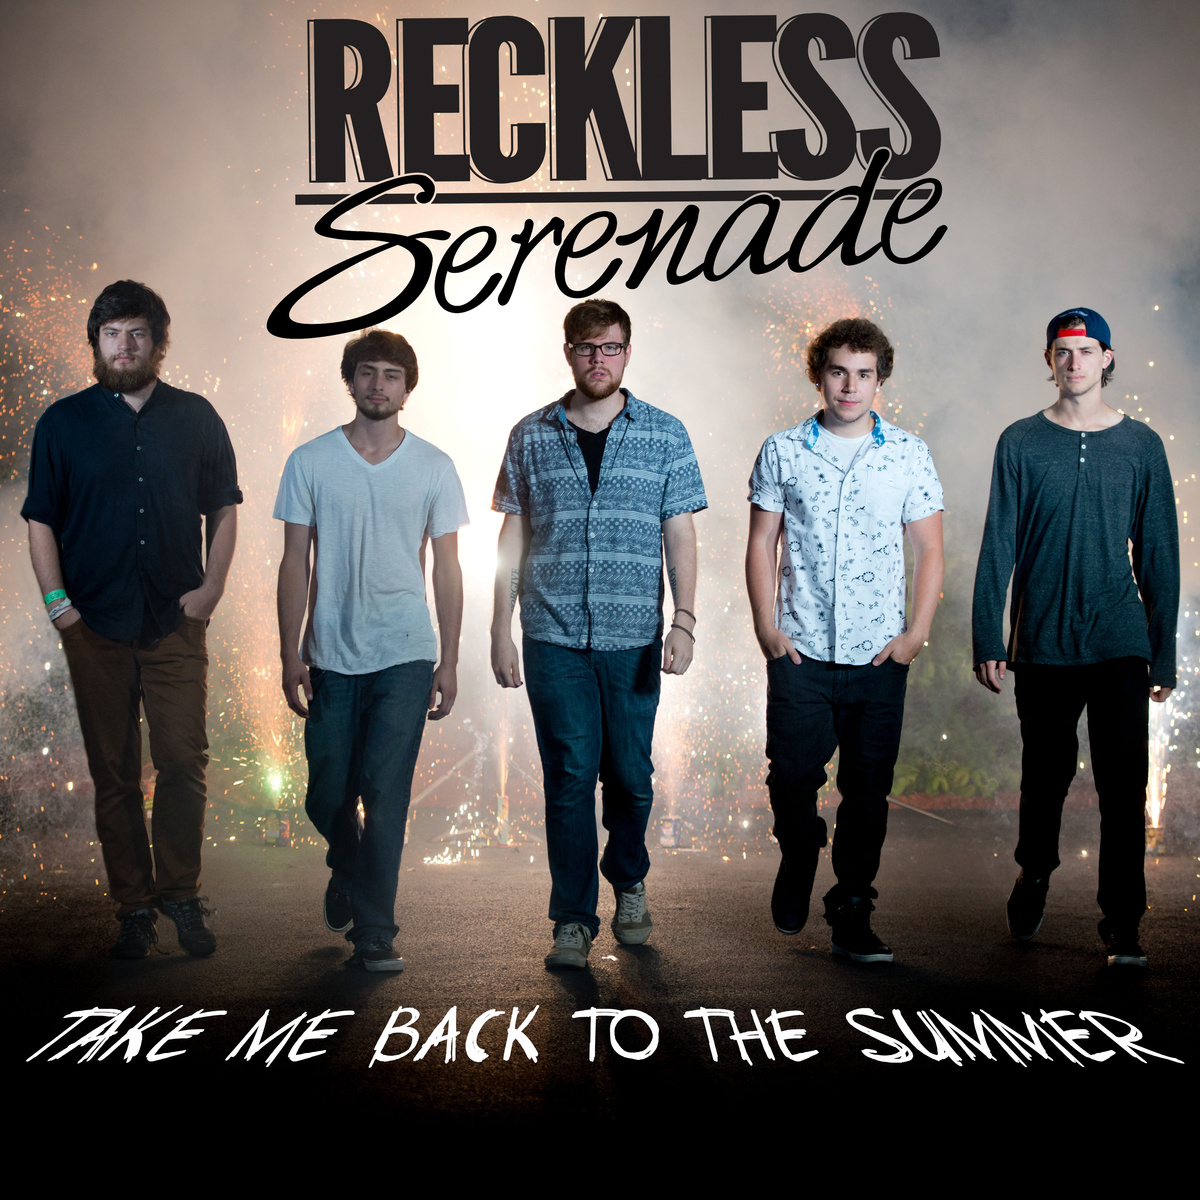 Tastes Like Rock - Reckless Serenade - Back To The Summer Review